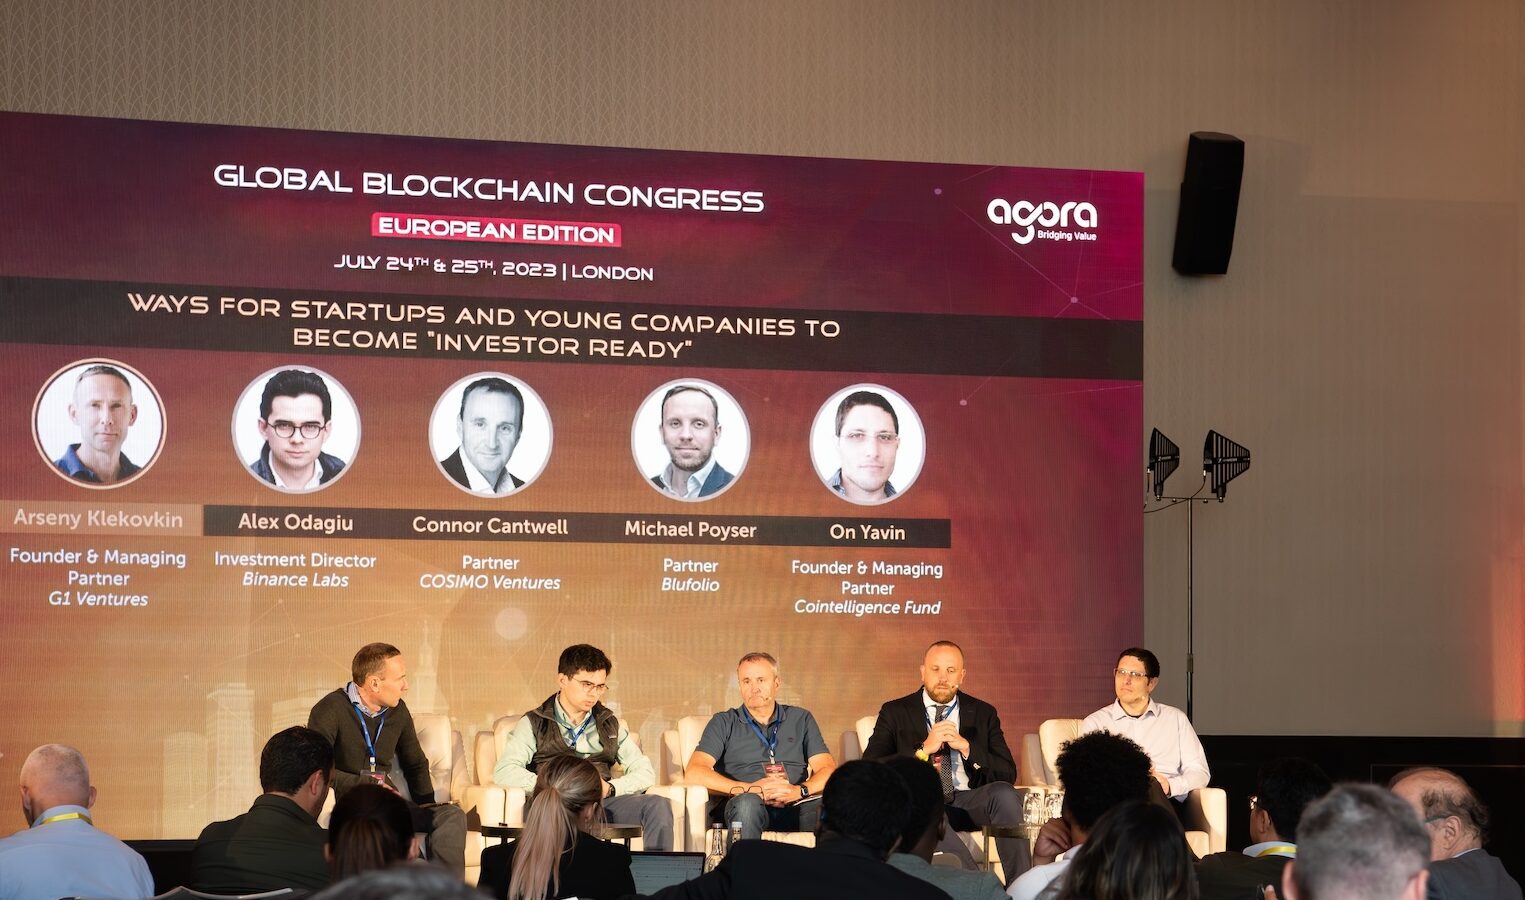 This image shows On Yavin speaks at the European stage at the Global Blockchain Congress.